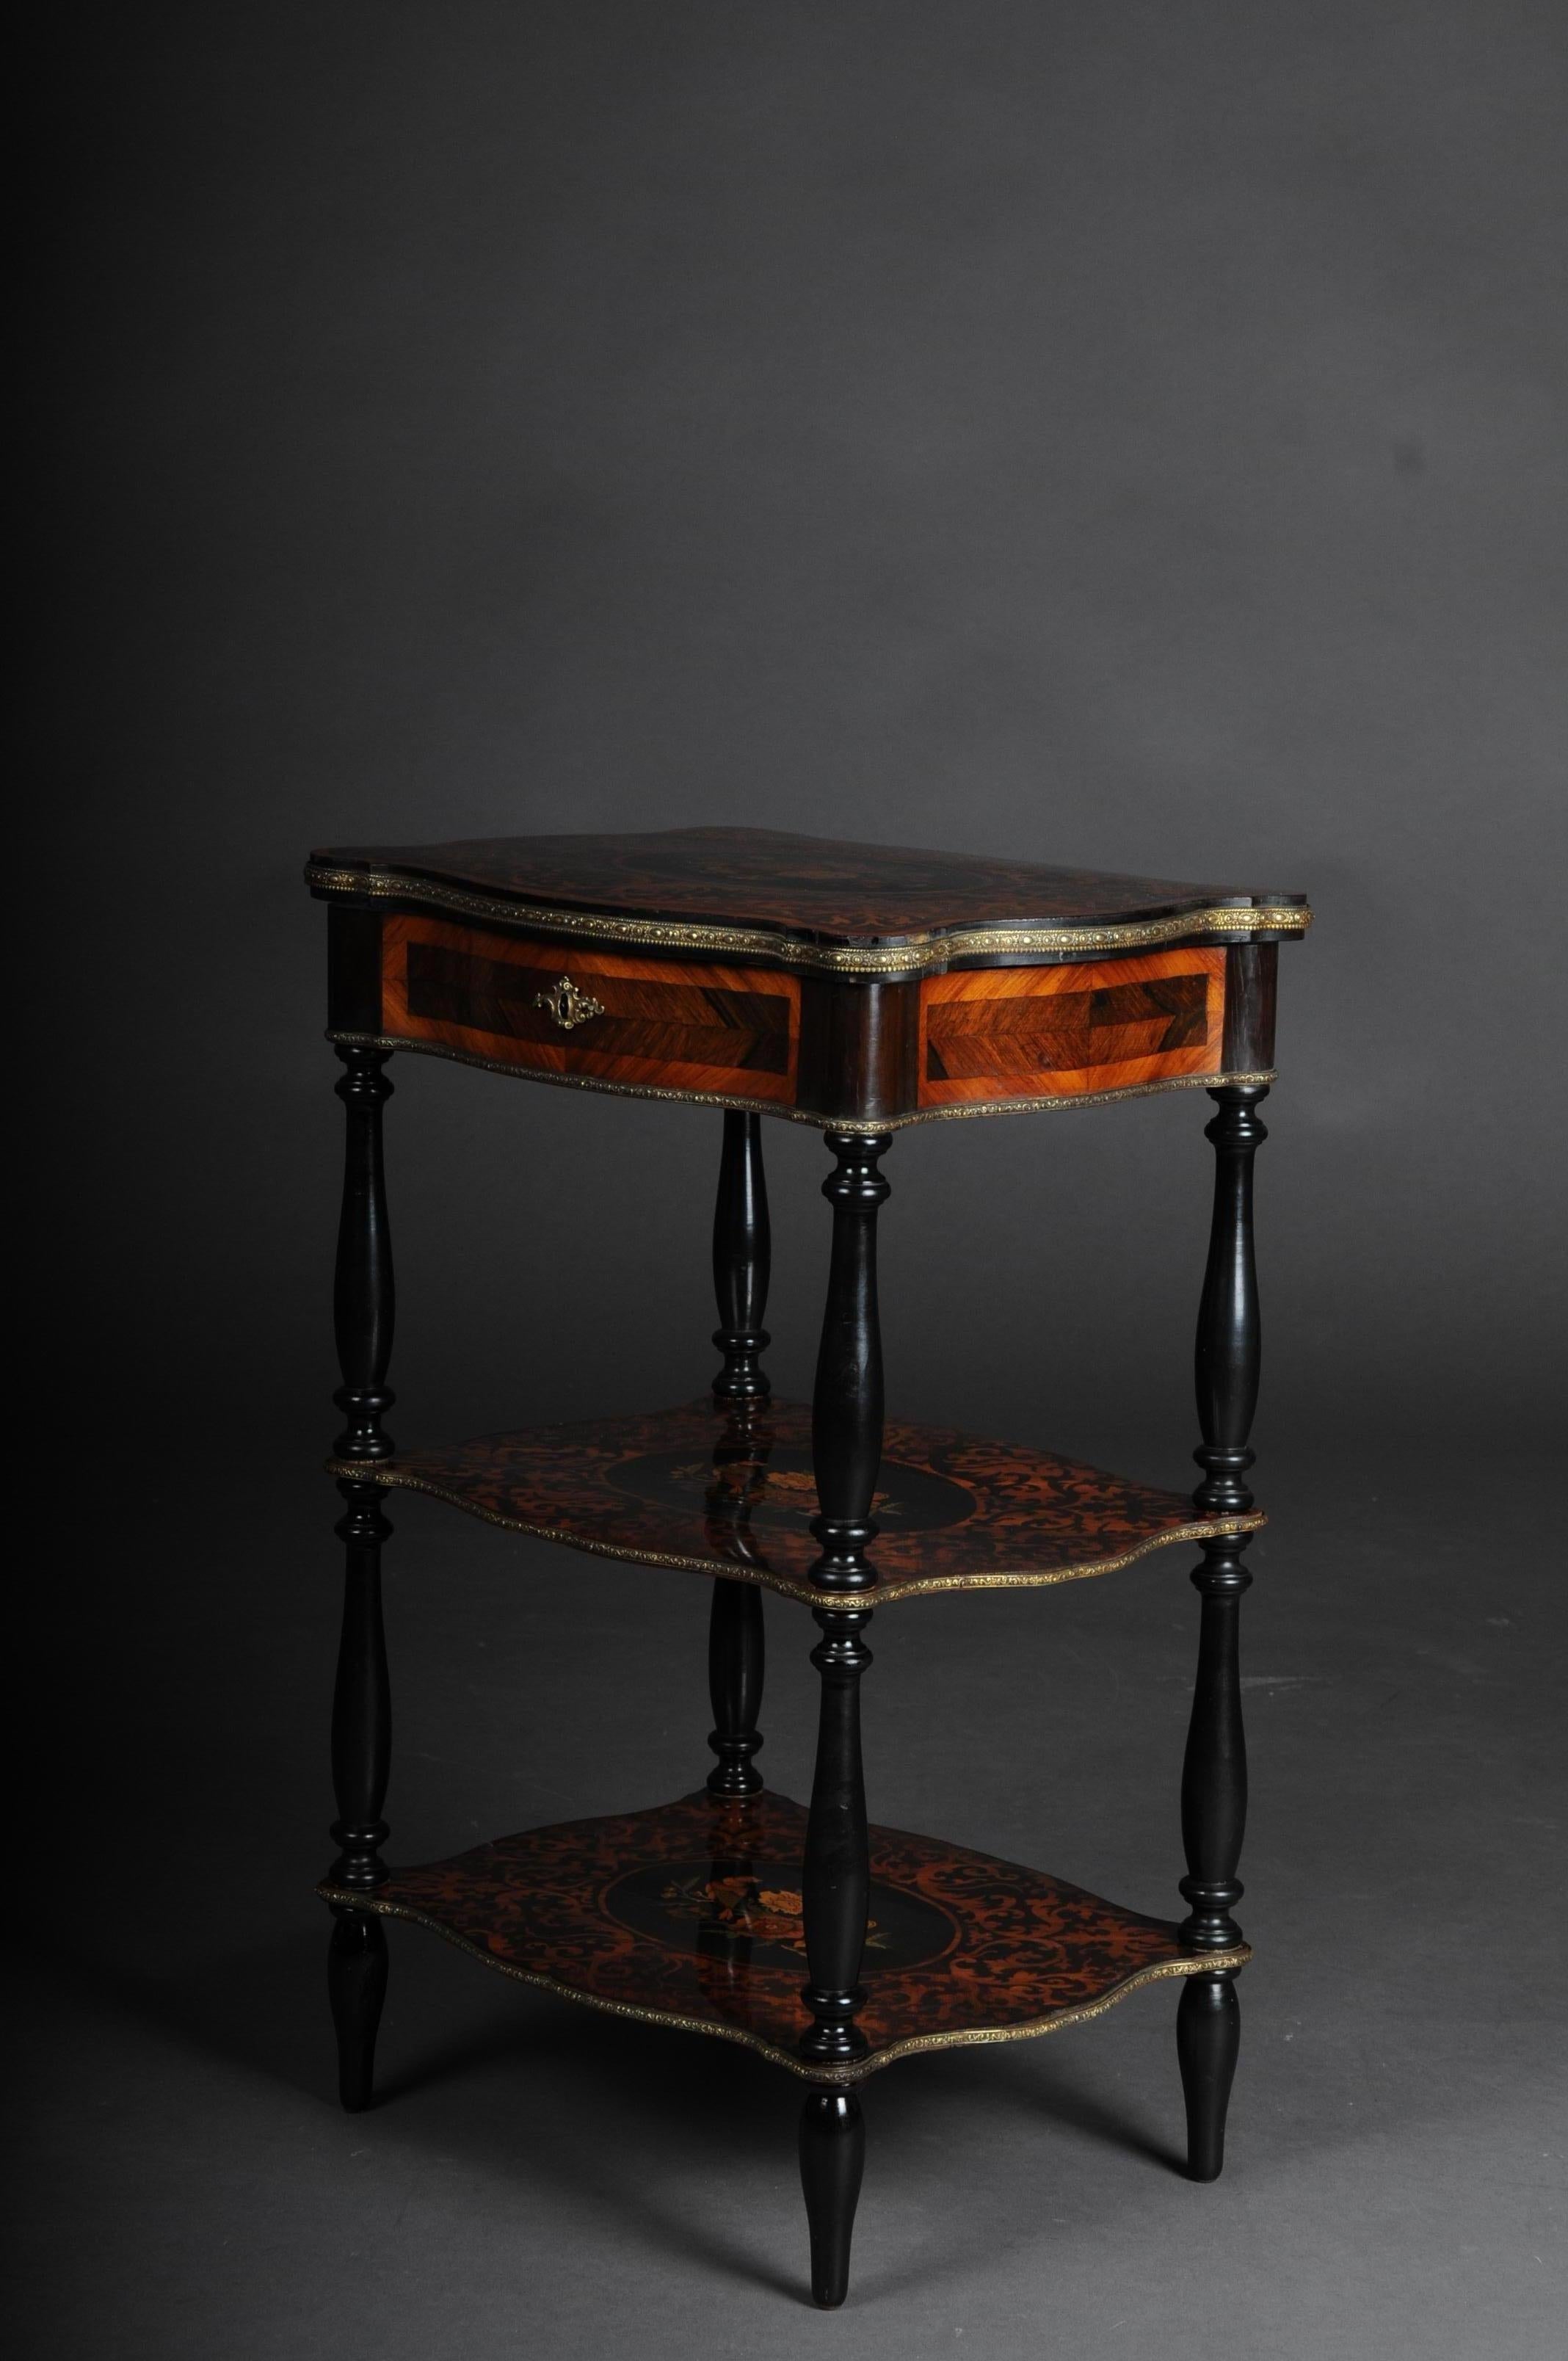 Italian 19th Century Marquetry Side Table with Jewelry Box, circa 1870